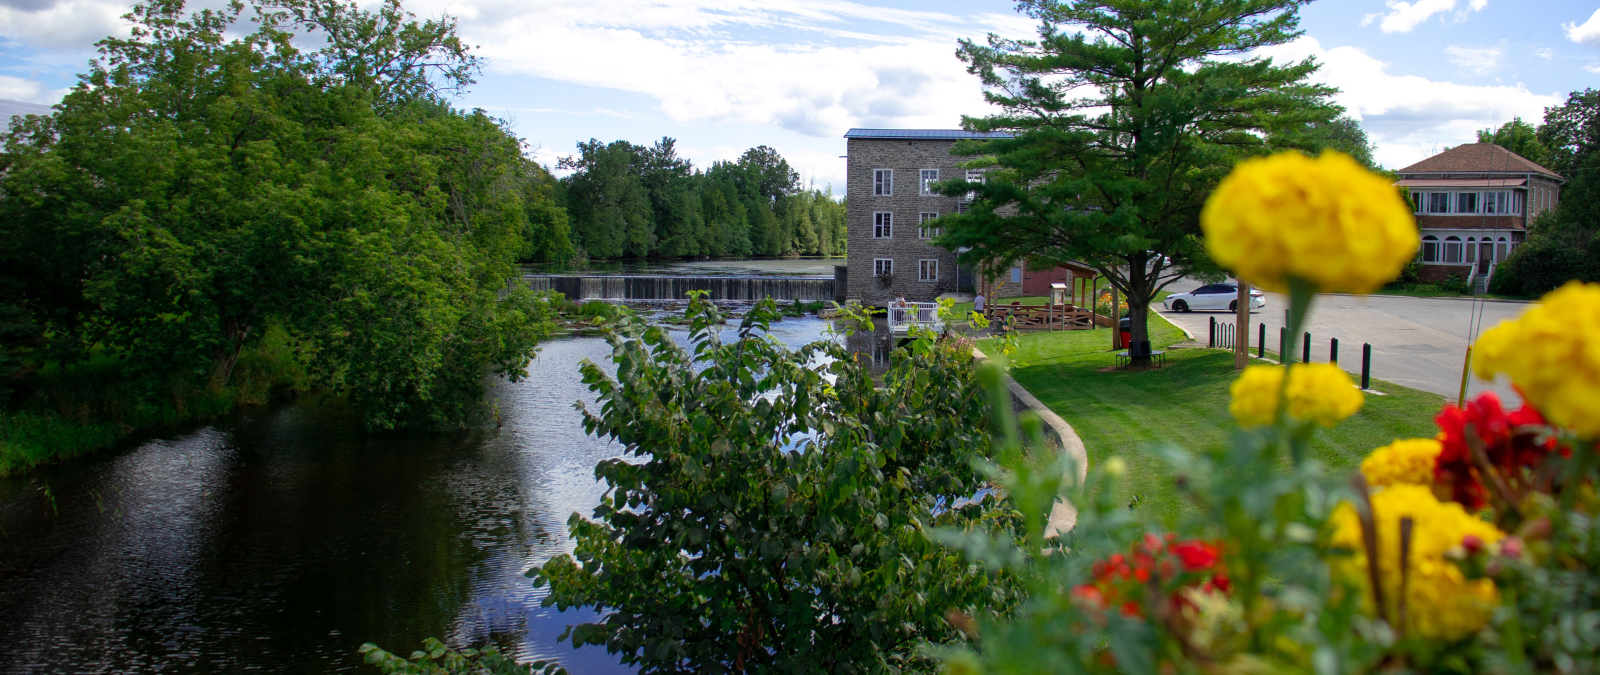 Image overlooking Spencerville Mill from the bridge with a view of the flower pot 